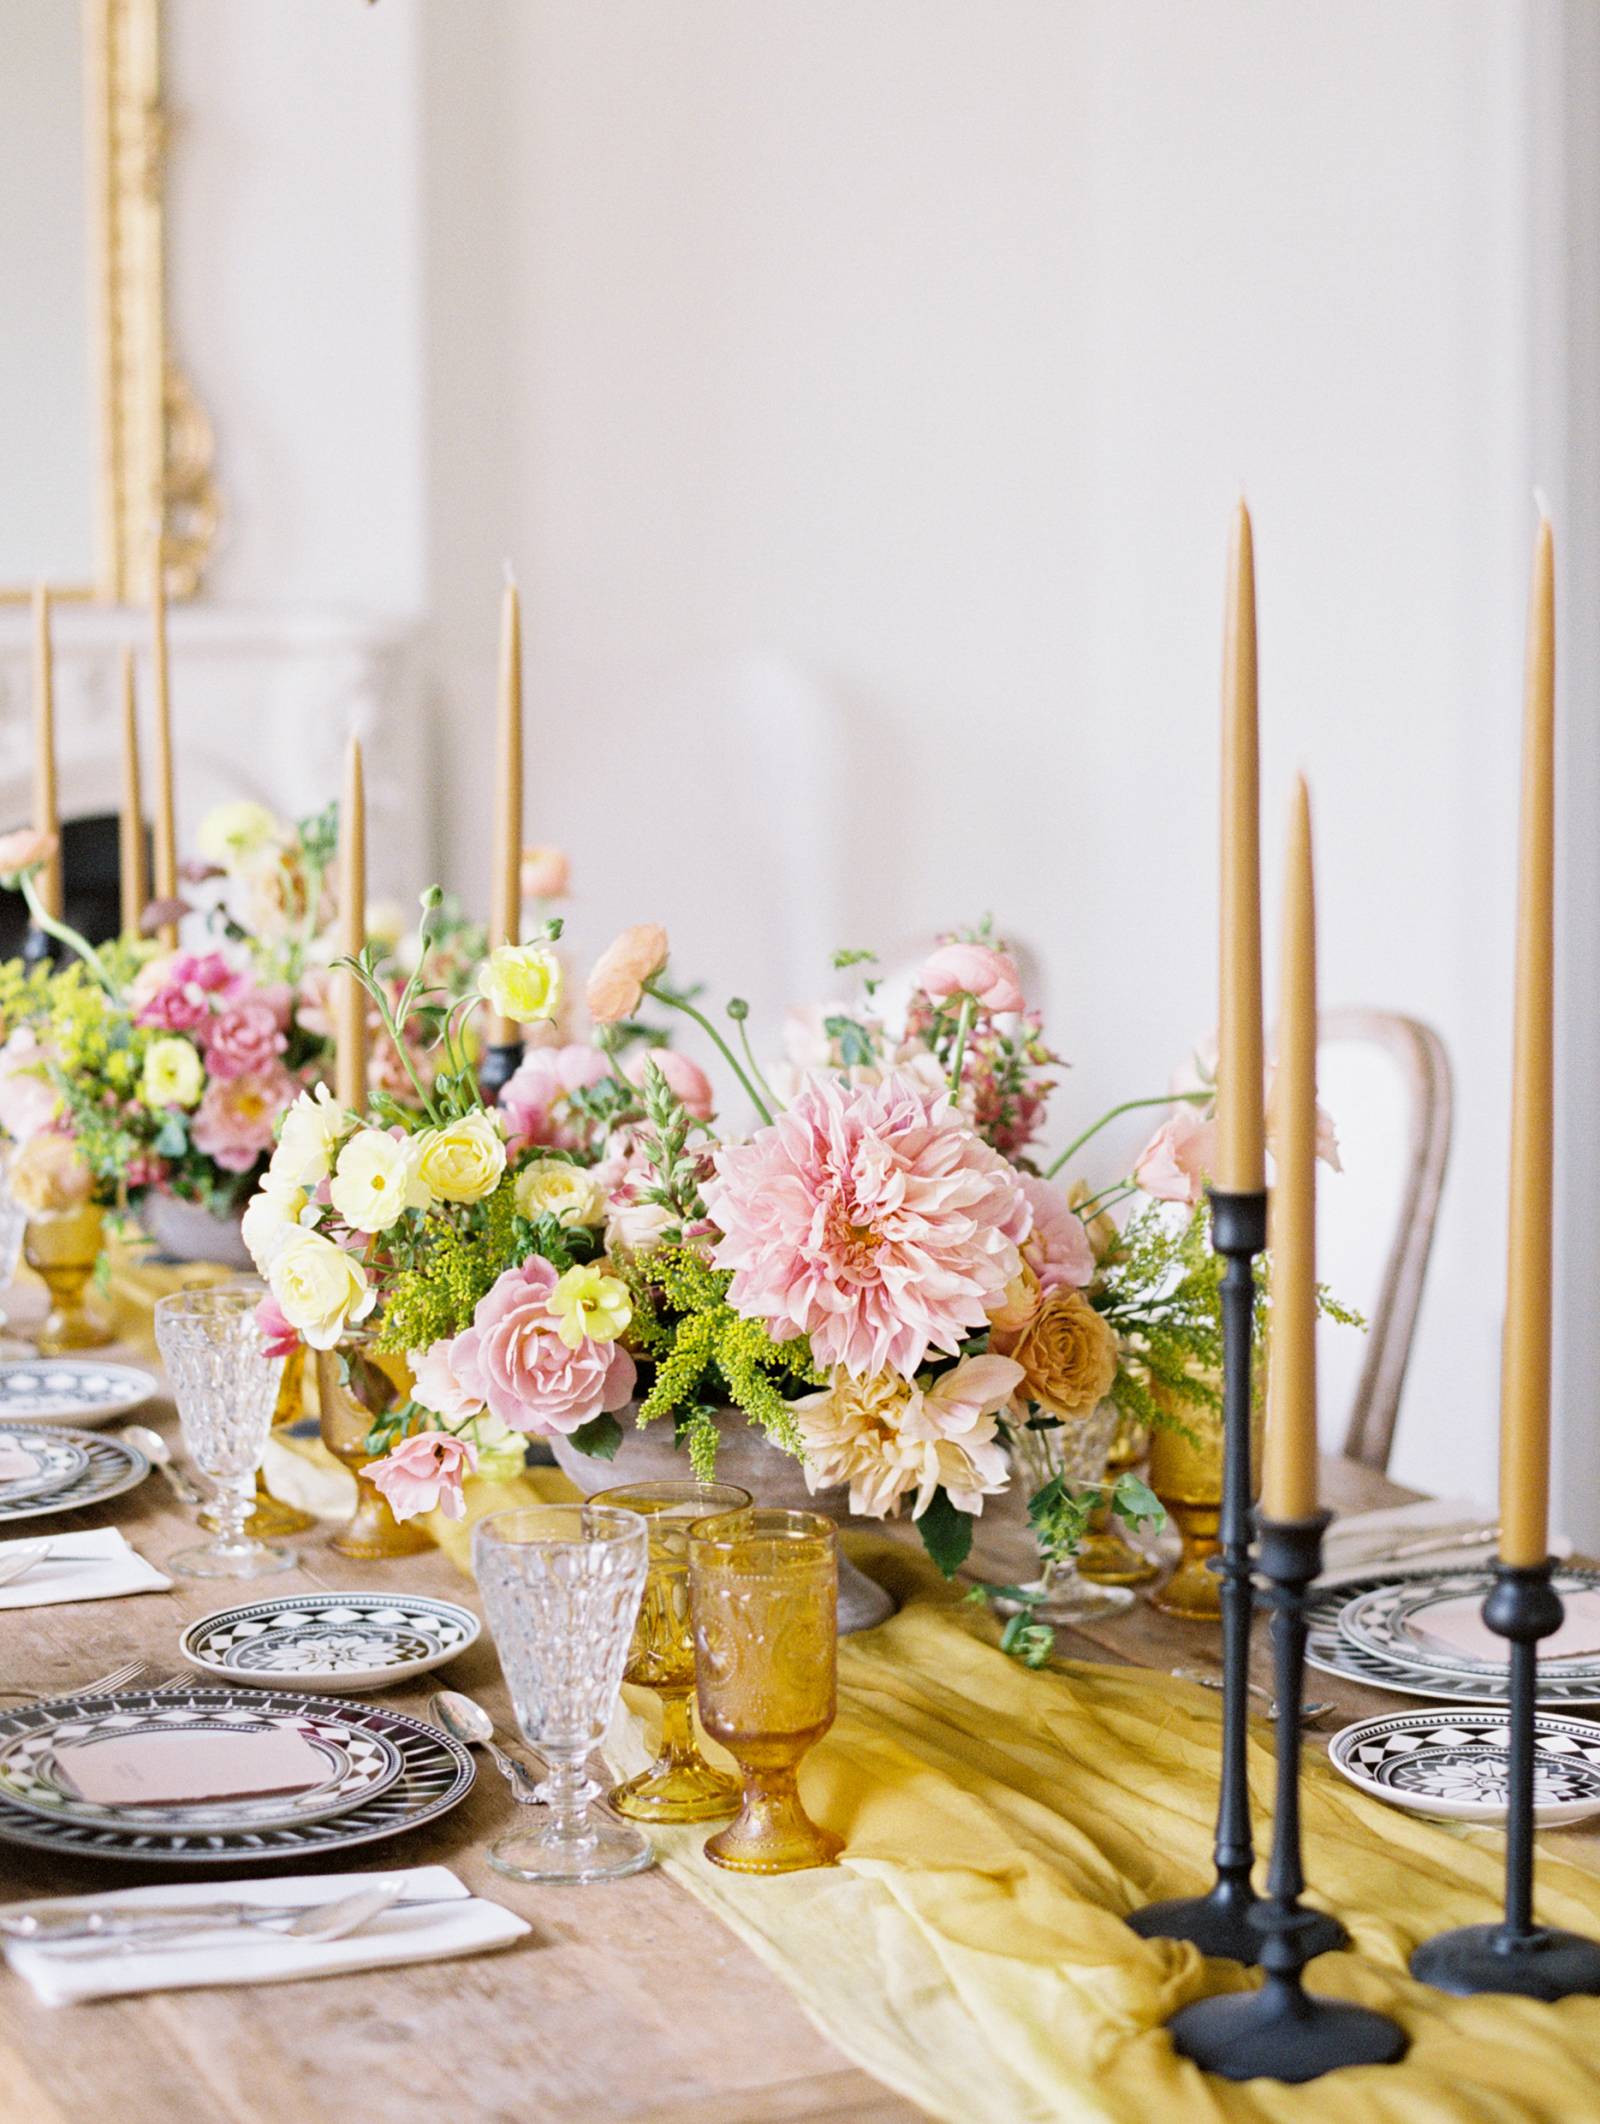 Whimsy meets stylish elegance in this Chateau Wedding inspiration ...